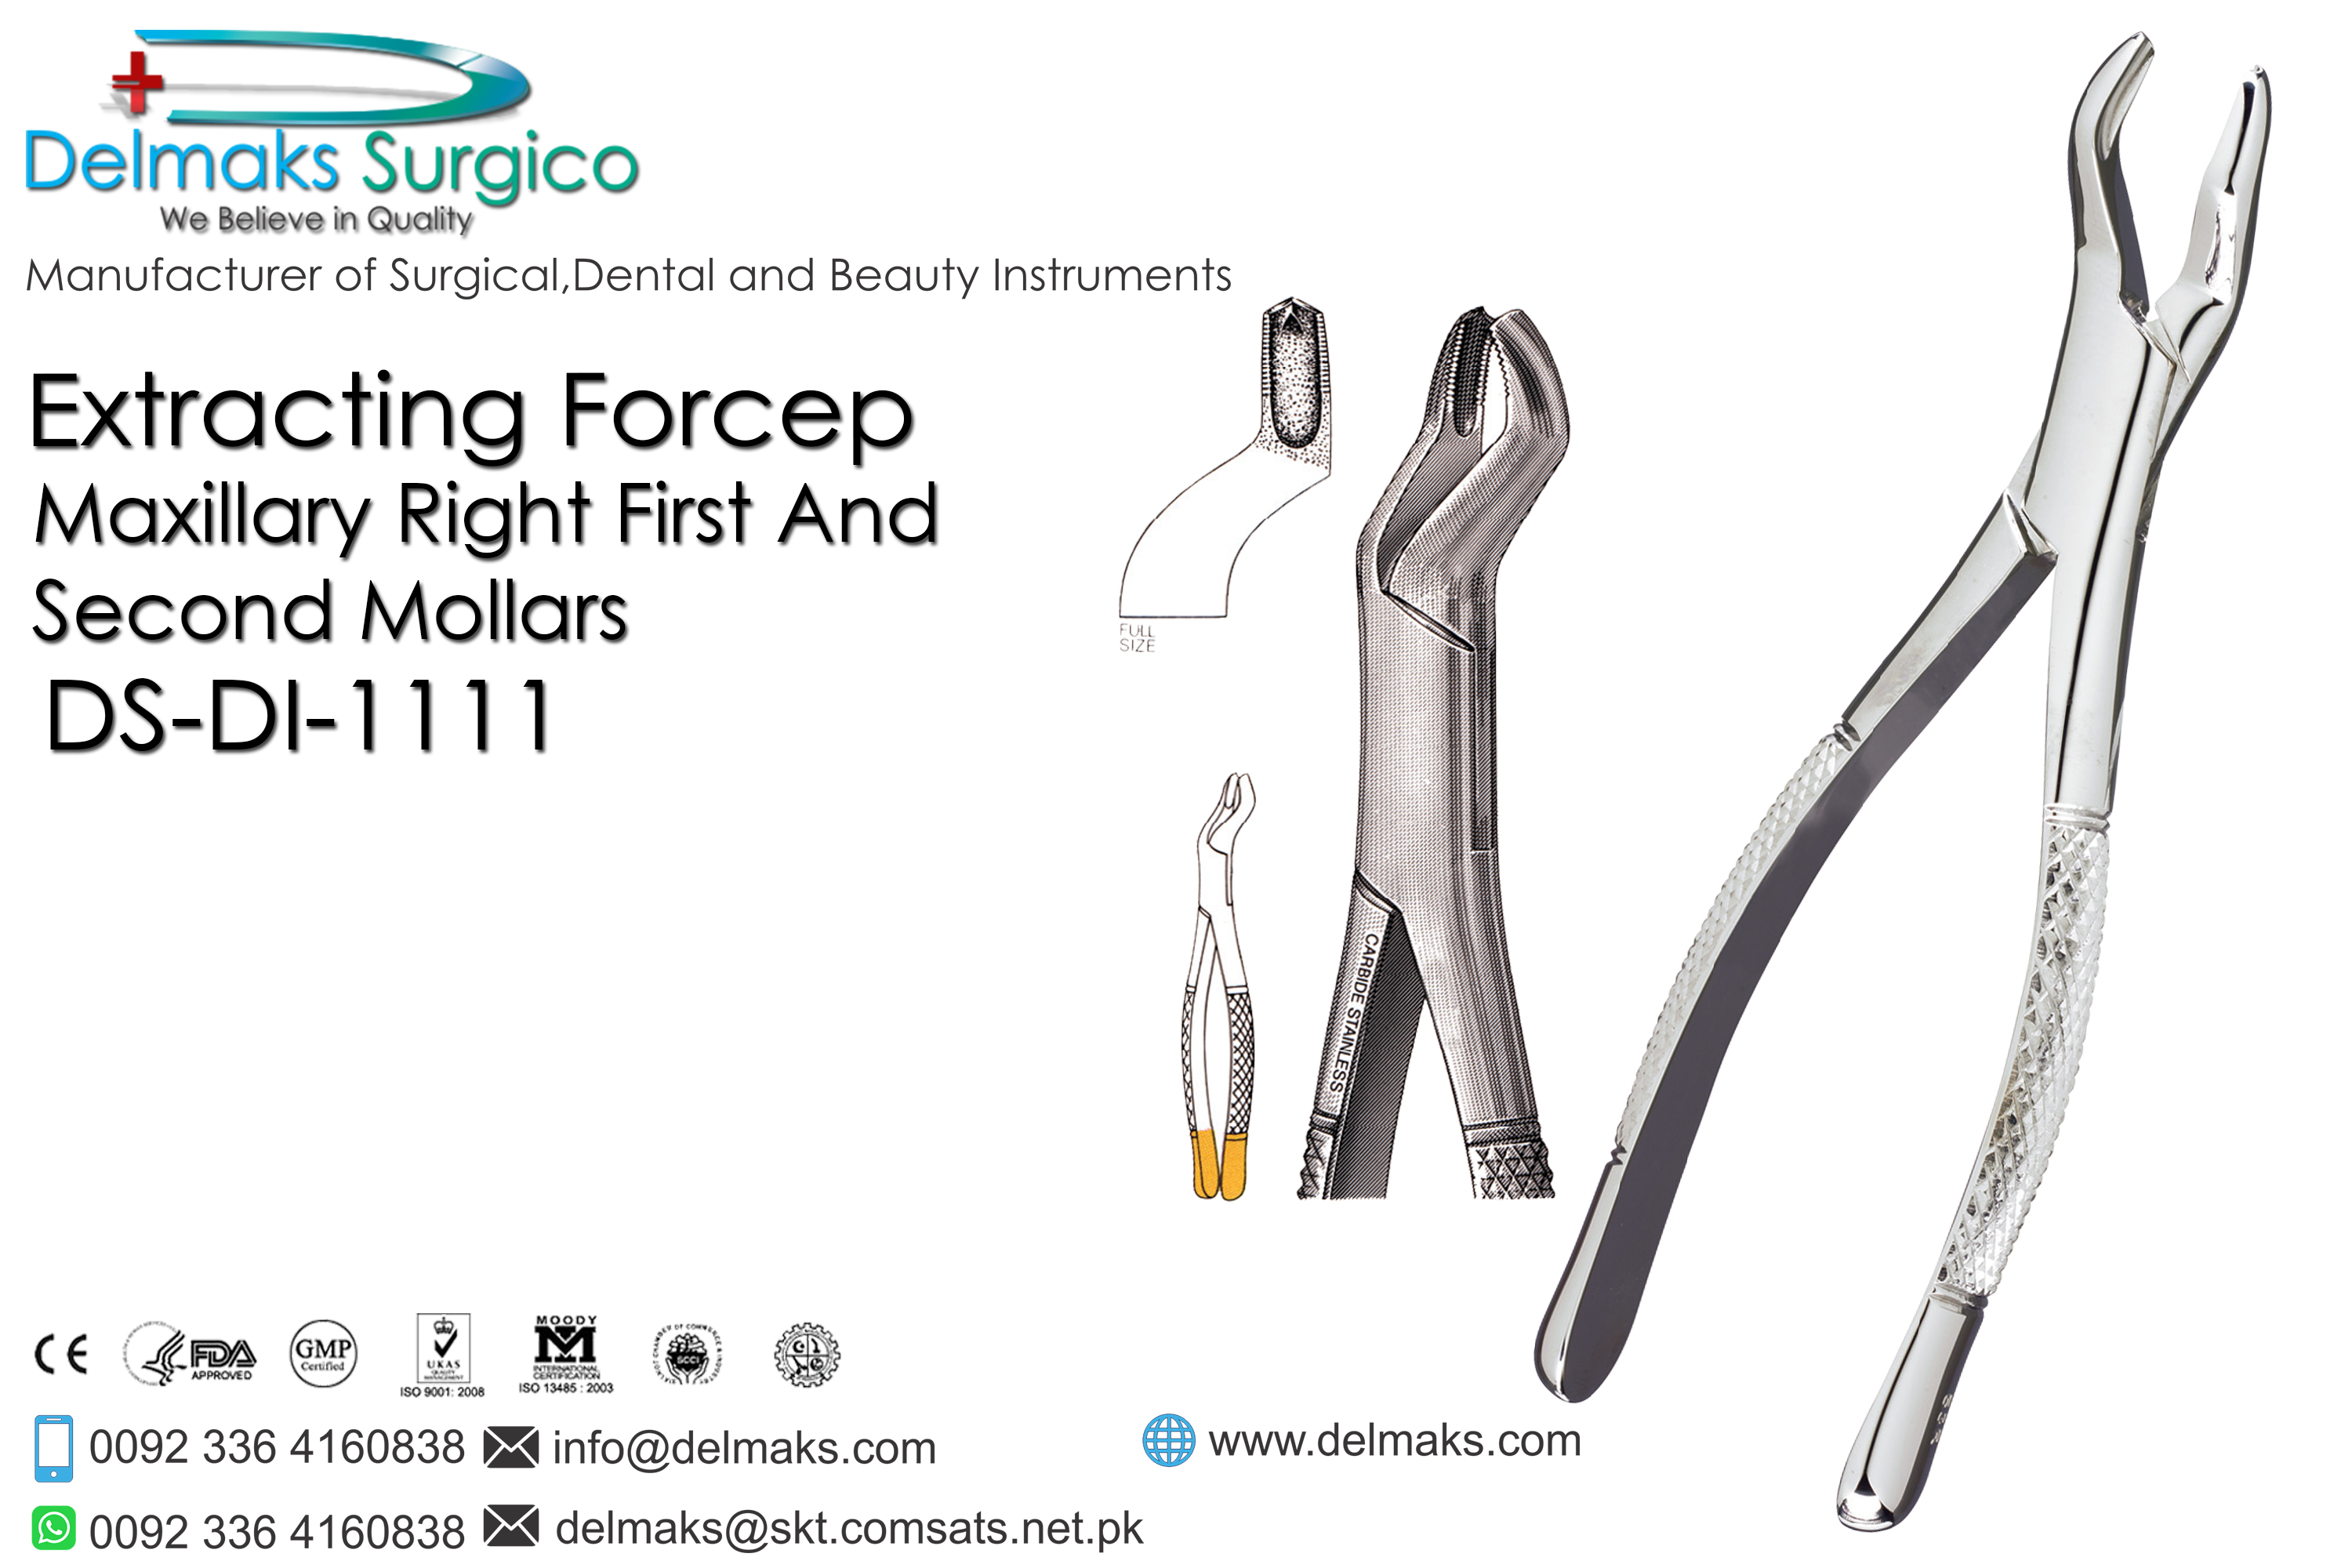 Extracting Forcep Mandibular First and Second Molars-Oral and Maxillofacial Surgery Instruments-Dental Instruments-Delmaks Surgico 